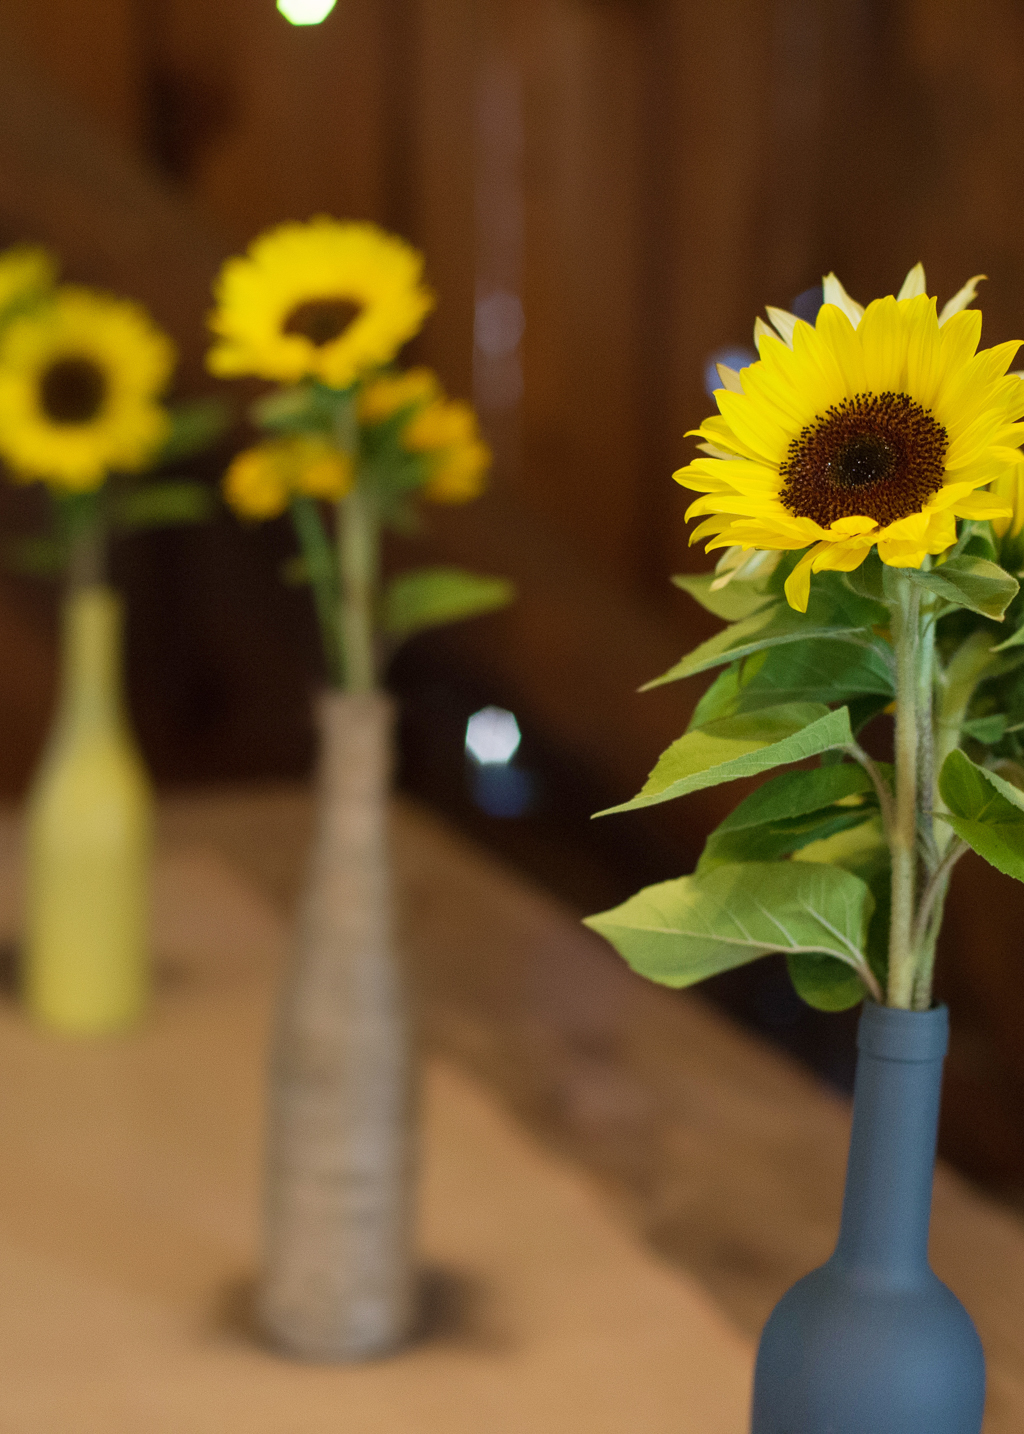 sunflowers in painted wine bottles line the table at a wedding